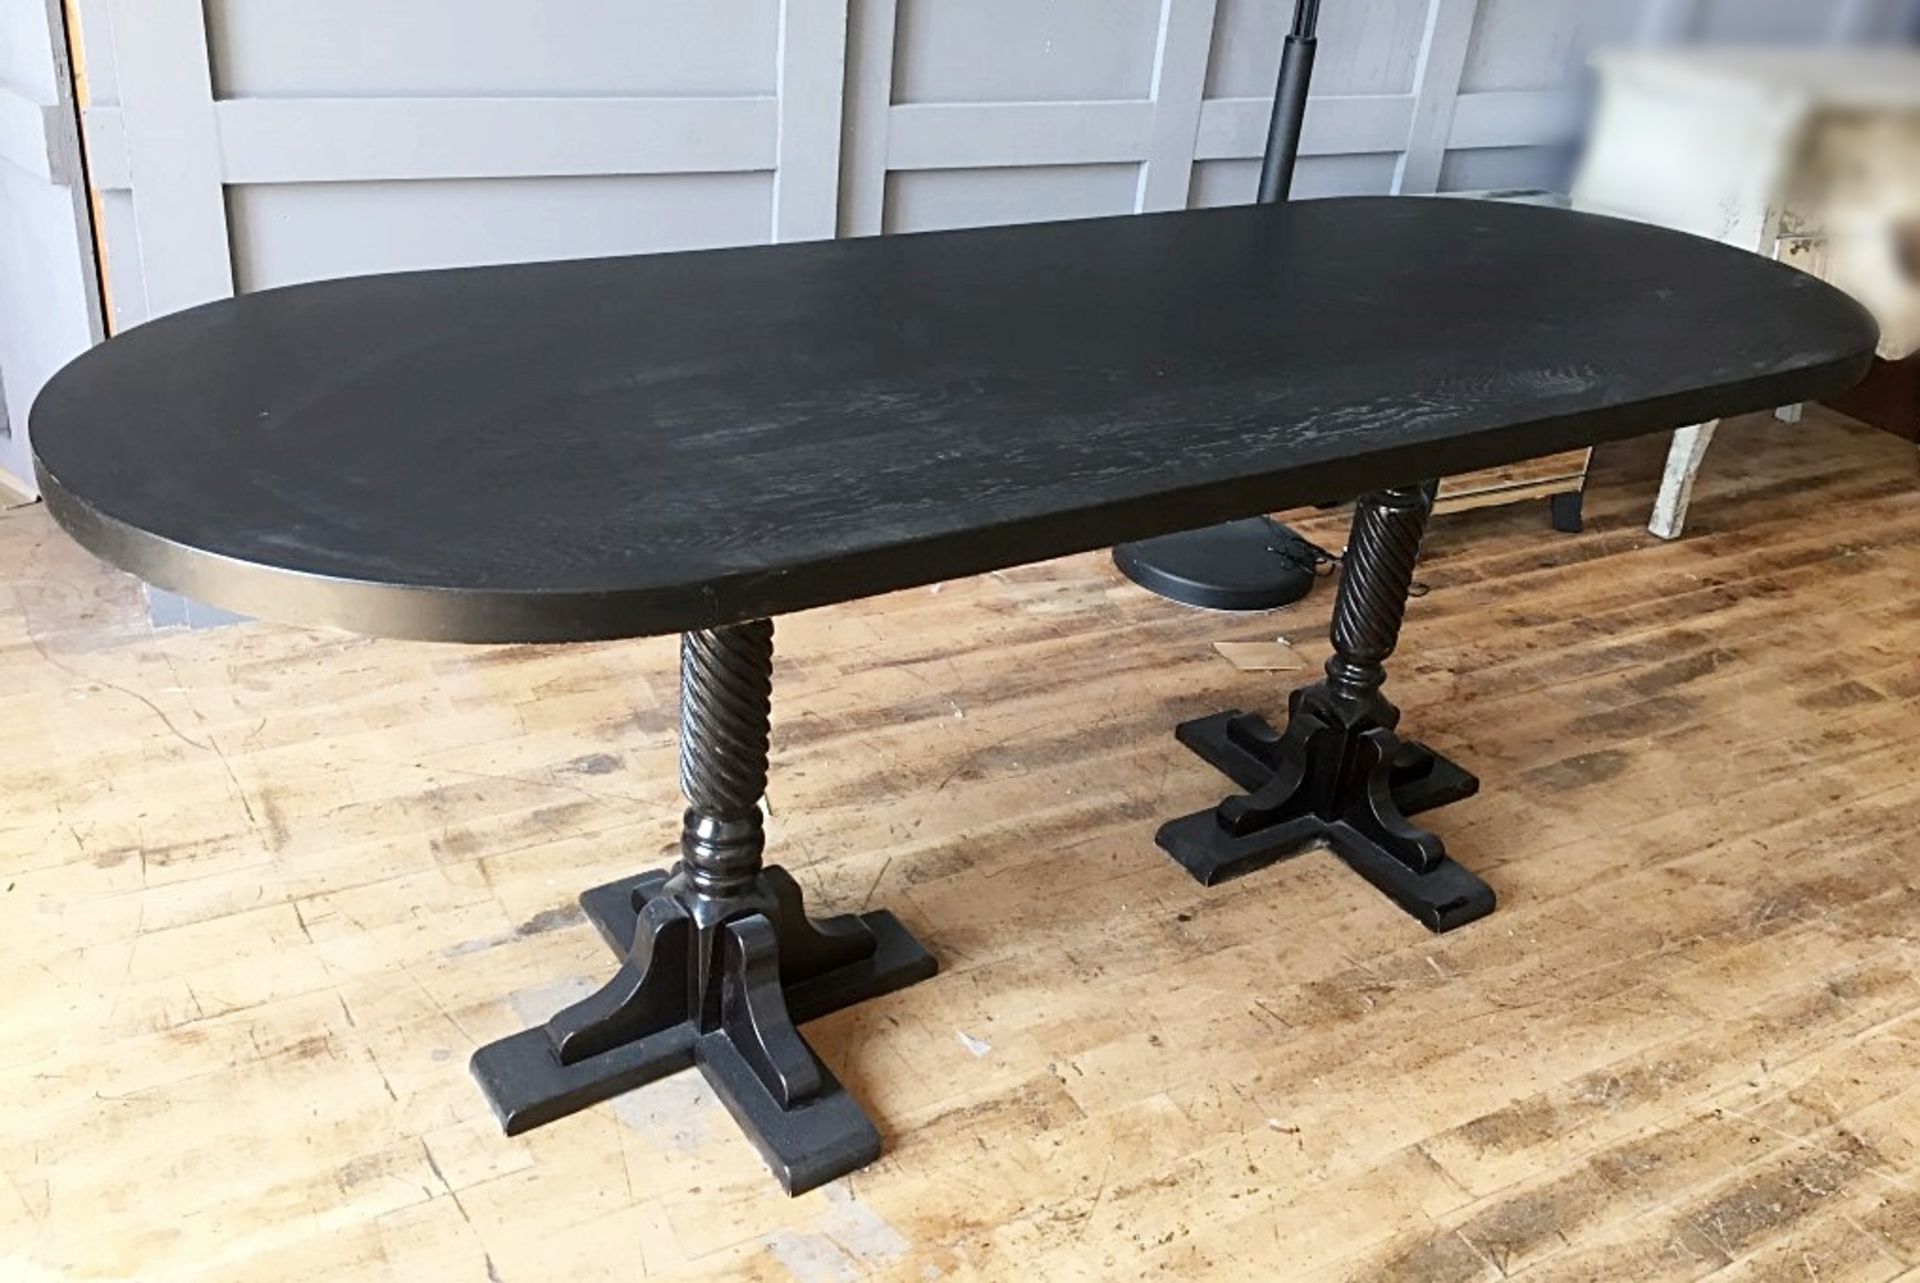 1 x Oval Period-Style Wooden Dining Table In A Dark Stain - Ex-Display - Dimensions: 200cm x width